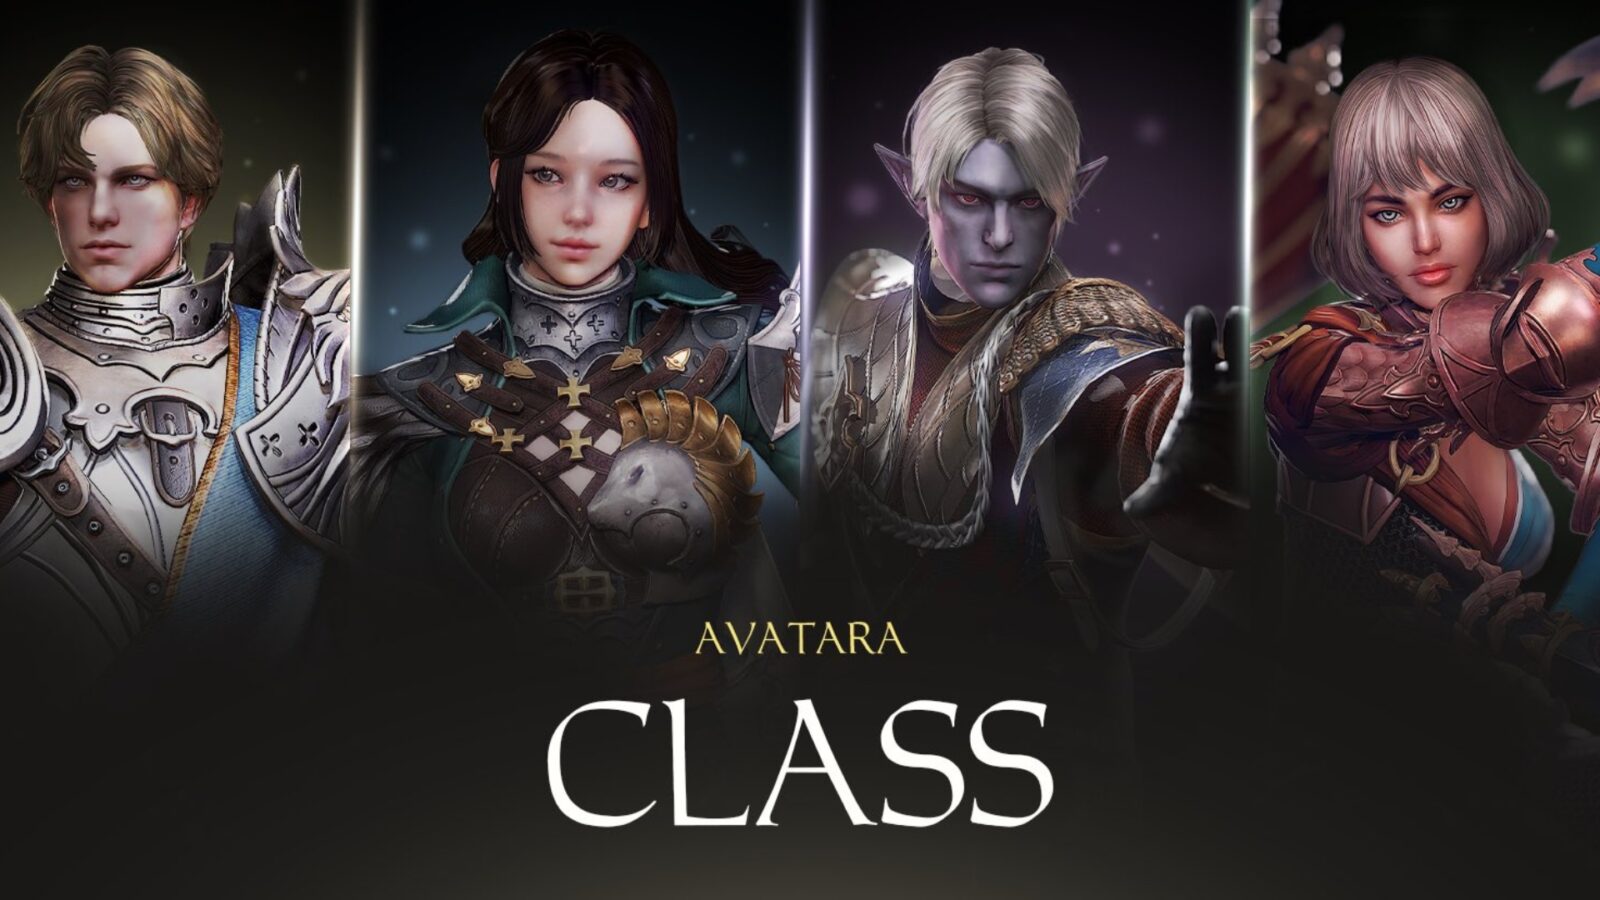 Klaytn Foundation, a non-profit organization focusing on enhancing the Klaytn blockchain ecosystem, was pleased to announce the launch of a new action-packed MMORPG on its mainnet, AVATARA.